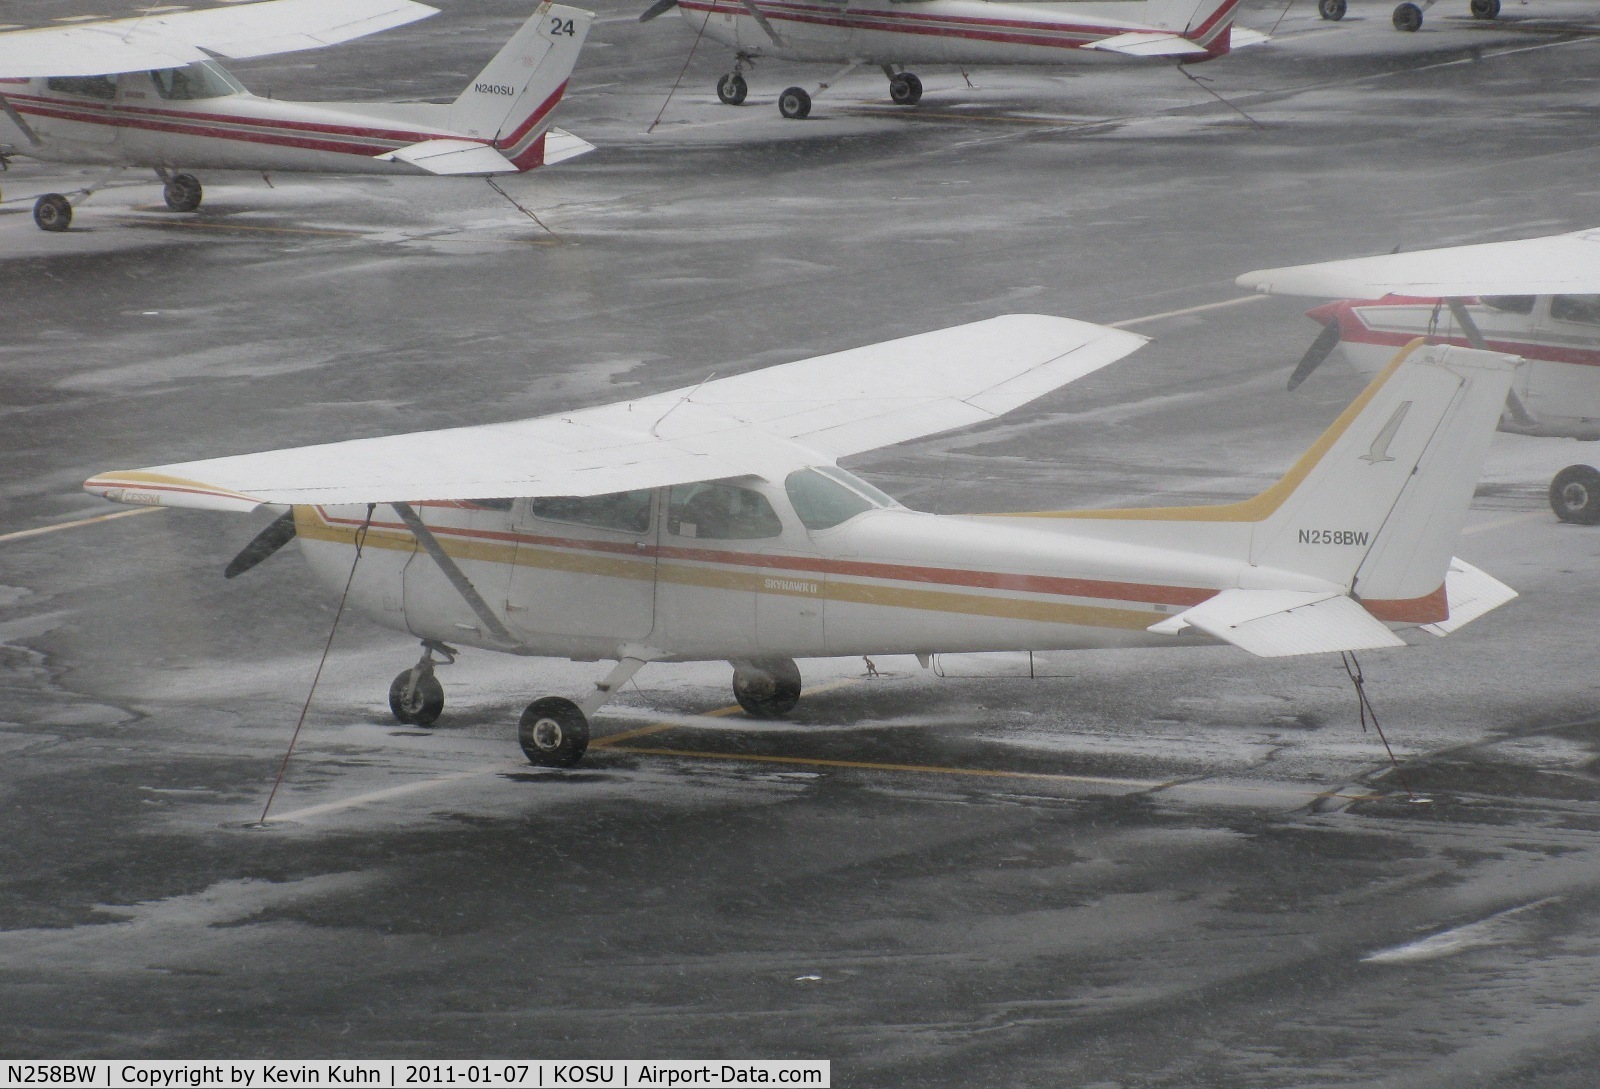 N258BW, 1981 Cessna 172P C/N 17274811, Some distortion as this was taken through the window of the old control tower